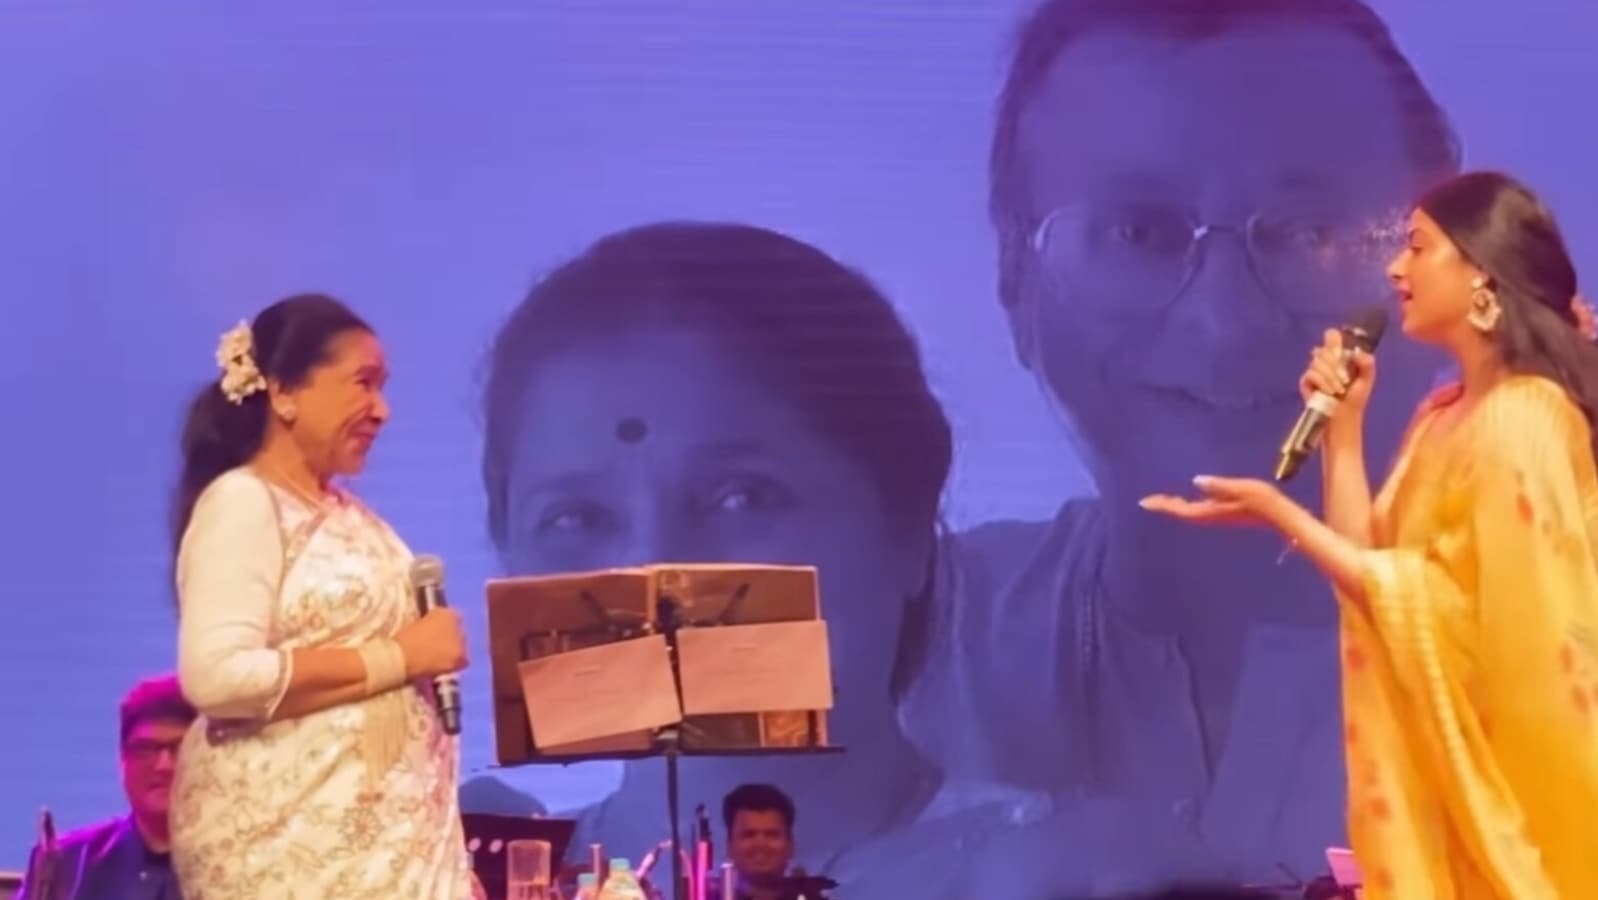 When Asha Bhosle and granddaughter Zanai sang her song together on stage. Watch